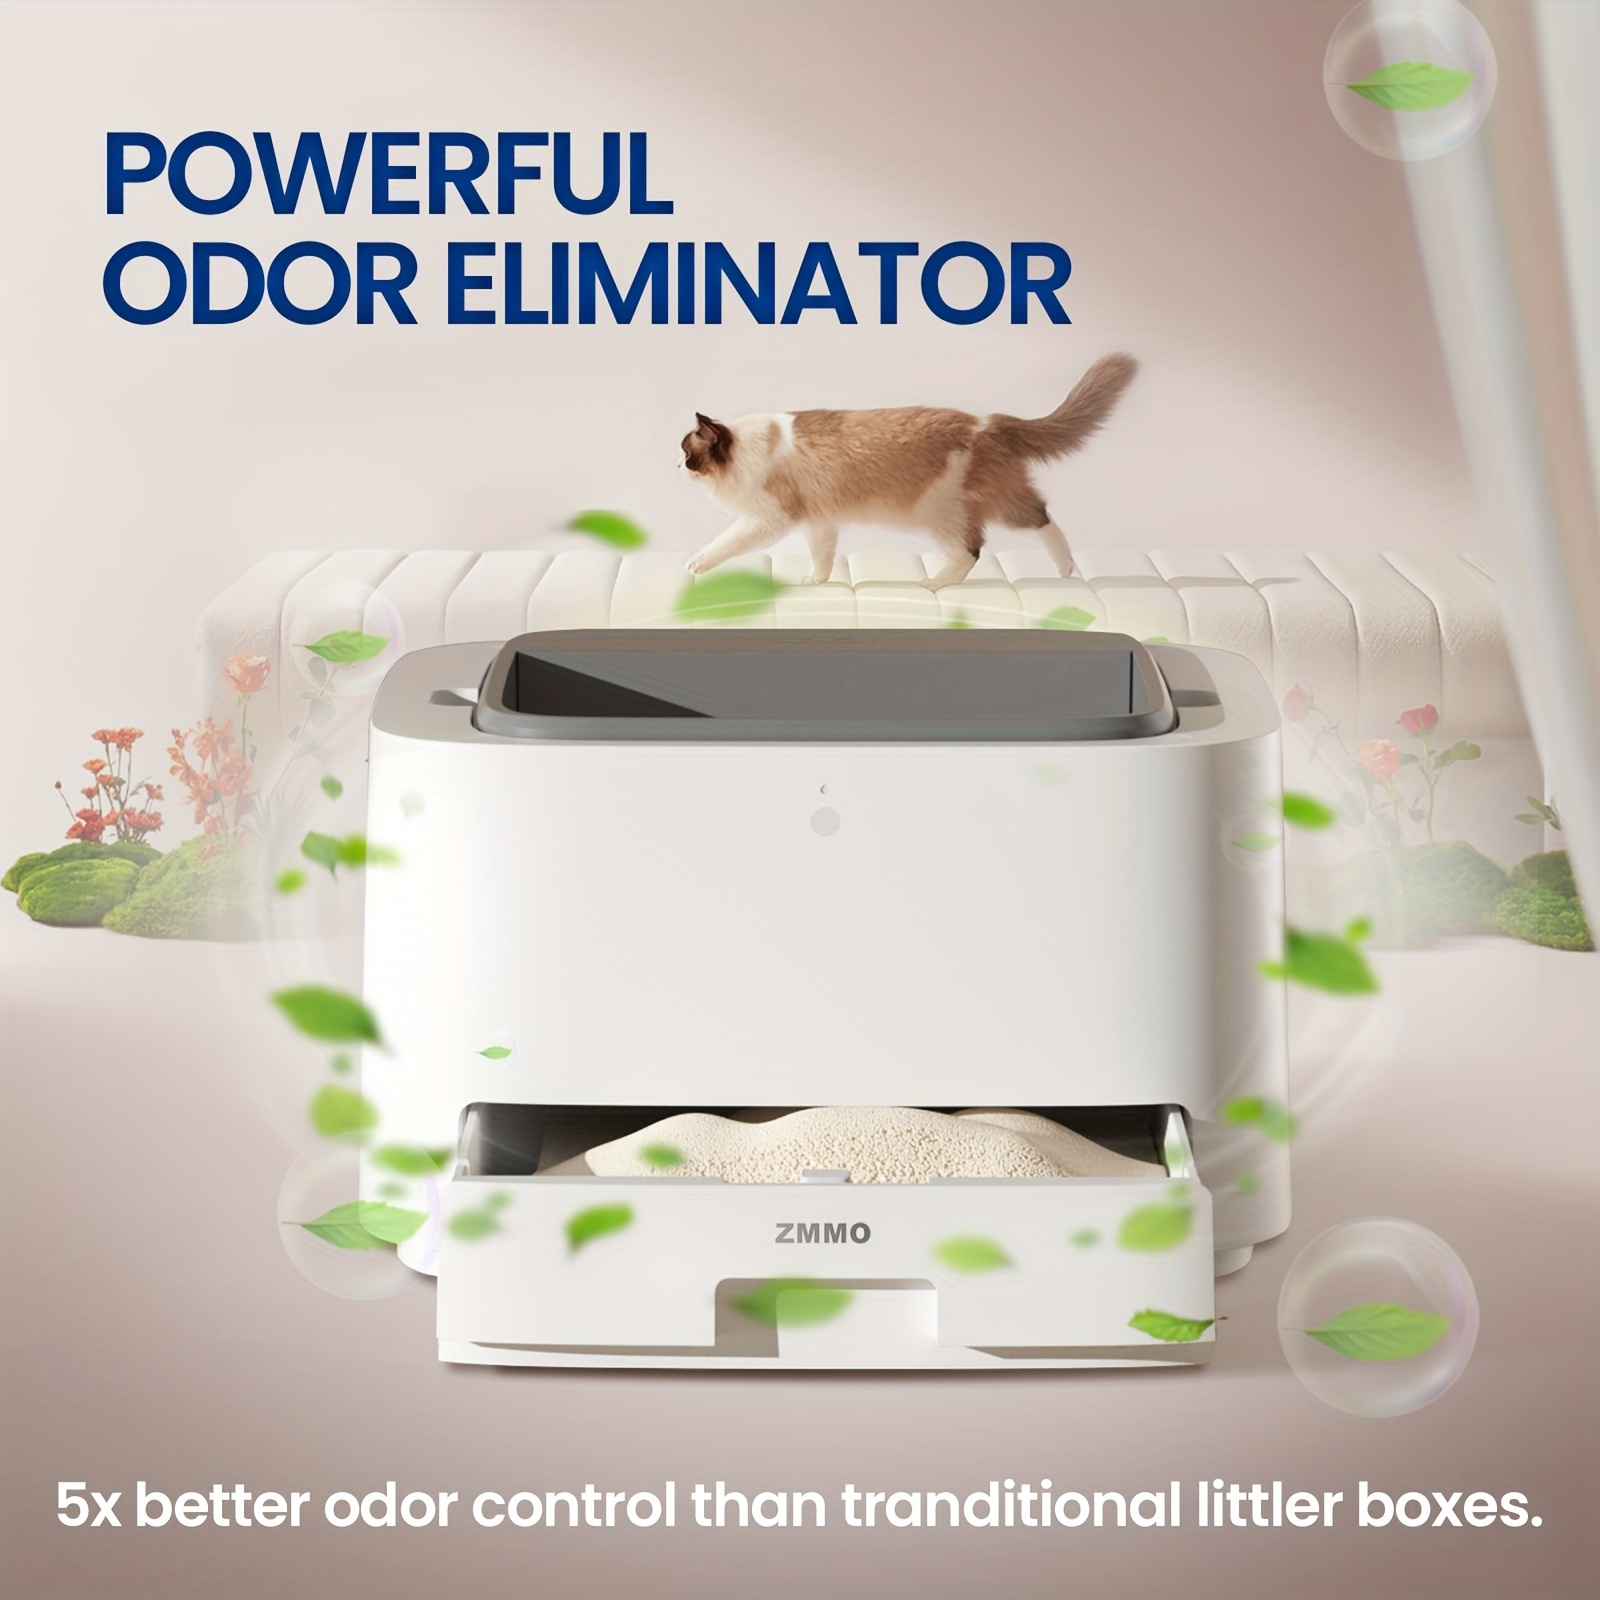 

Semi-automatic Cat Litter Box, 20.47in Smart Odor Eliminating Kitty Litter Pan, 5x Odor Control, Pet-friendly, With Litter Scoop And Waste Bag Dispenser, For Home Use